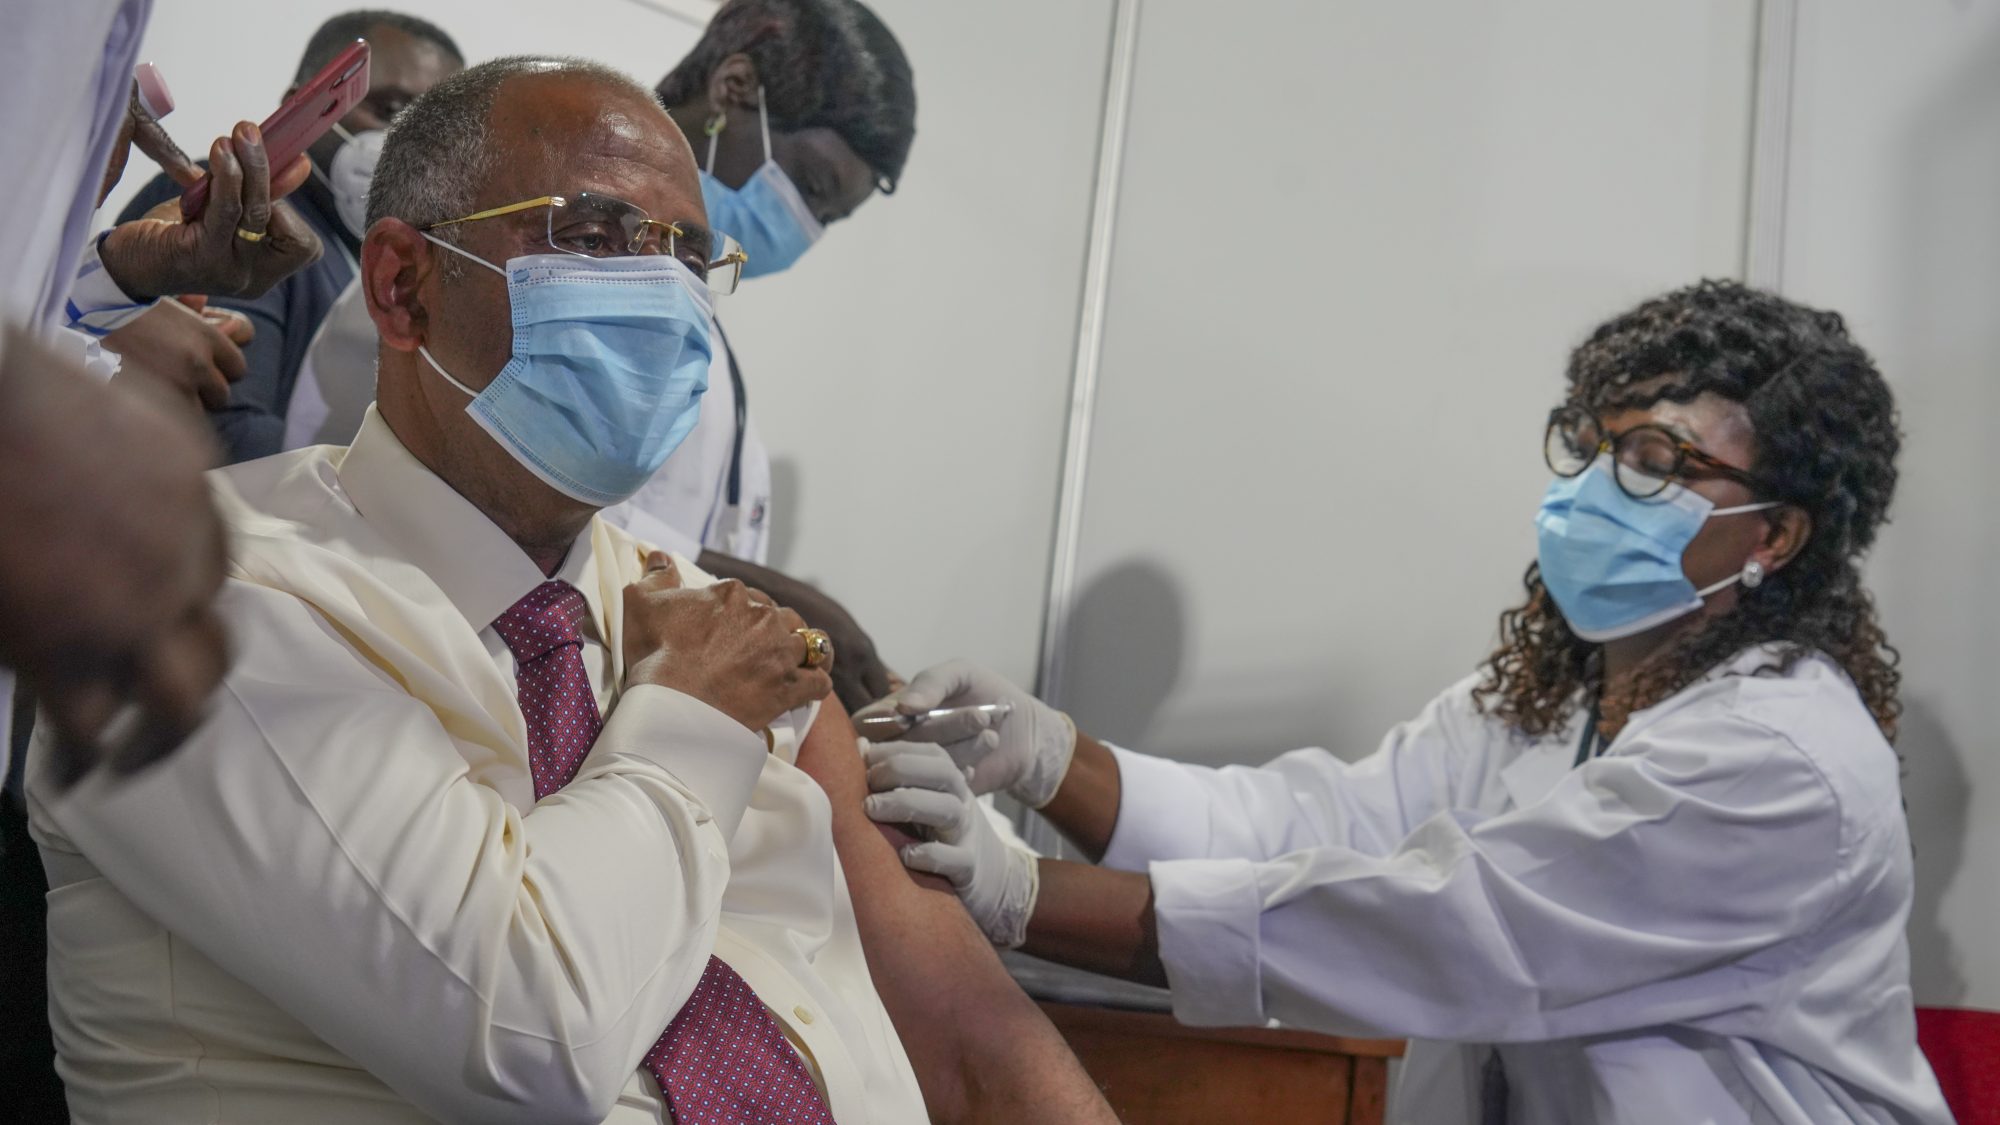 Patrick Achi, Chief of Staff to the President of Côte d’Ivoire, becomes the first person to receive a COVAX vaccine at the launch of the nation’s COVID-19 vaccination campaign at the Abidjan Parc des Sports on March 1, 2021. (Gavi/2021)